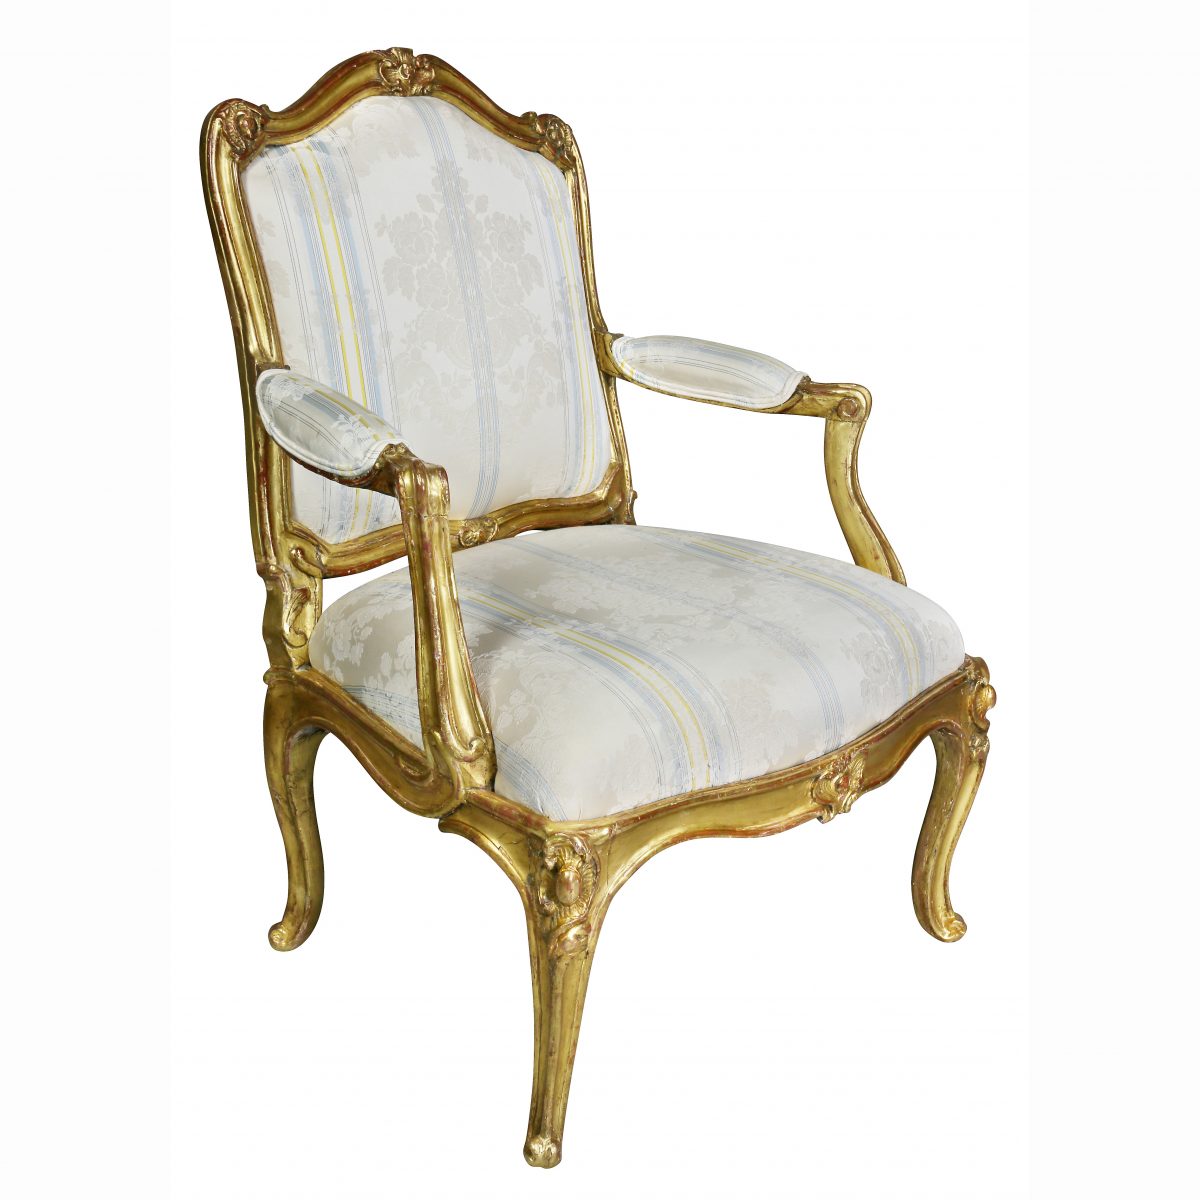 Giltwood Louis XV fauteuil (armchair) with neoclassical details 1765 (via  Mallett Antiques)